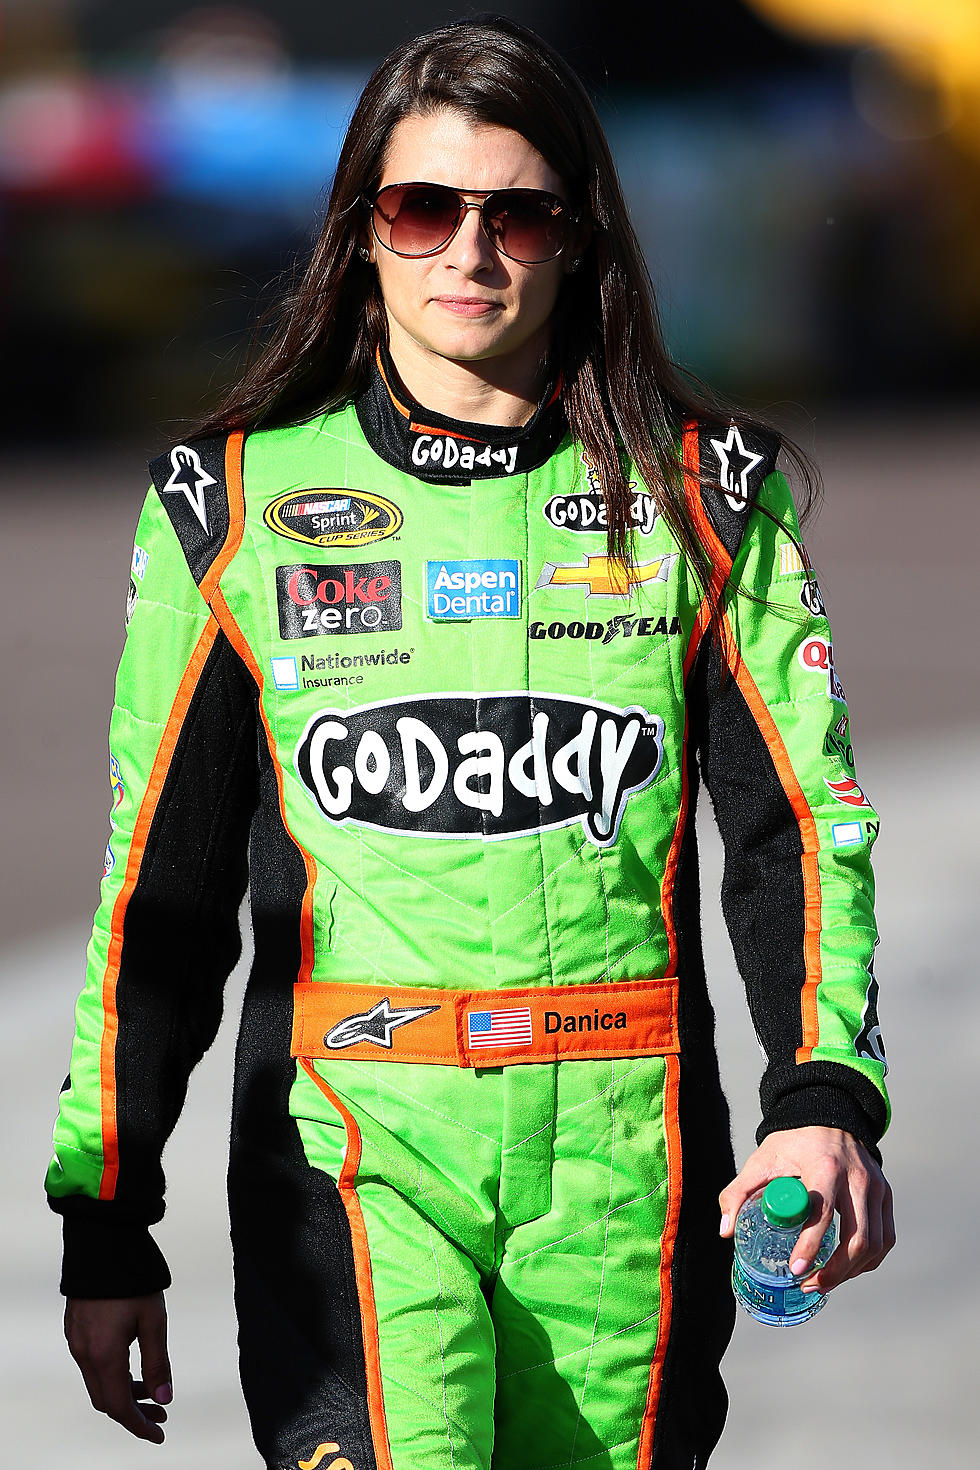 NASCAR and Danica Patrick: Will They ever Mix?